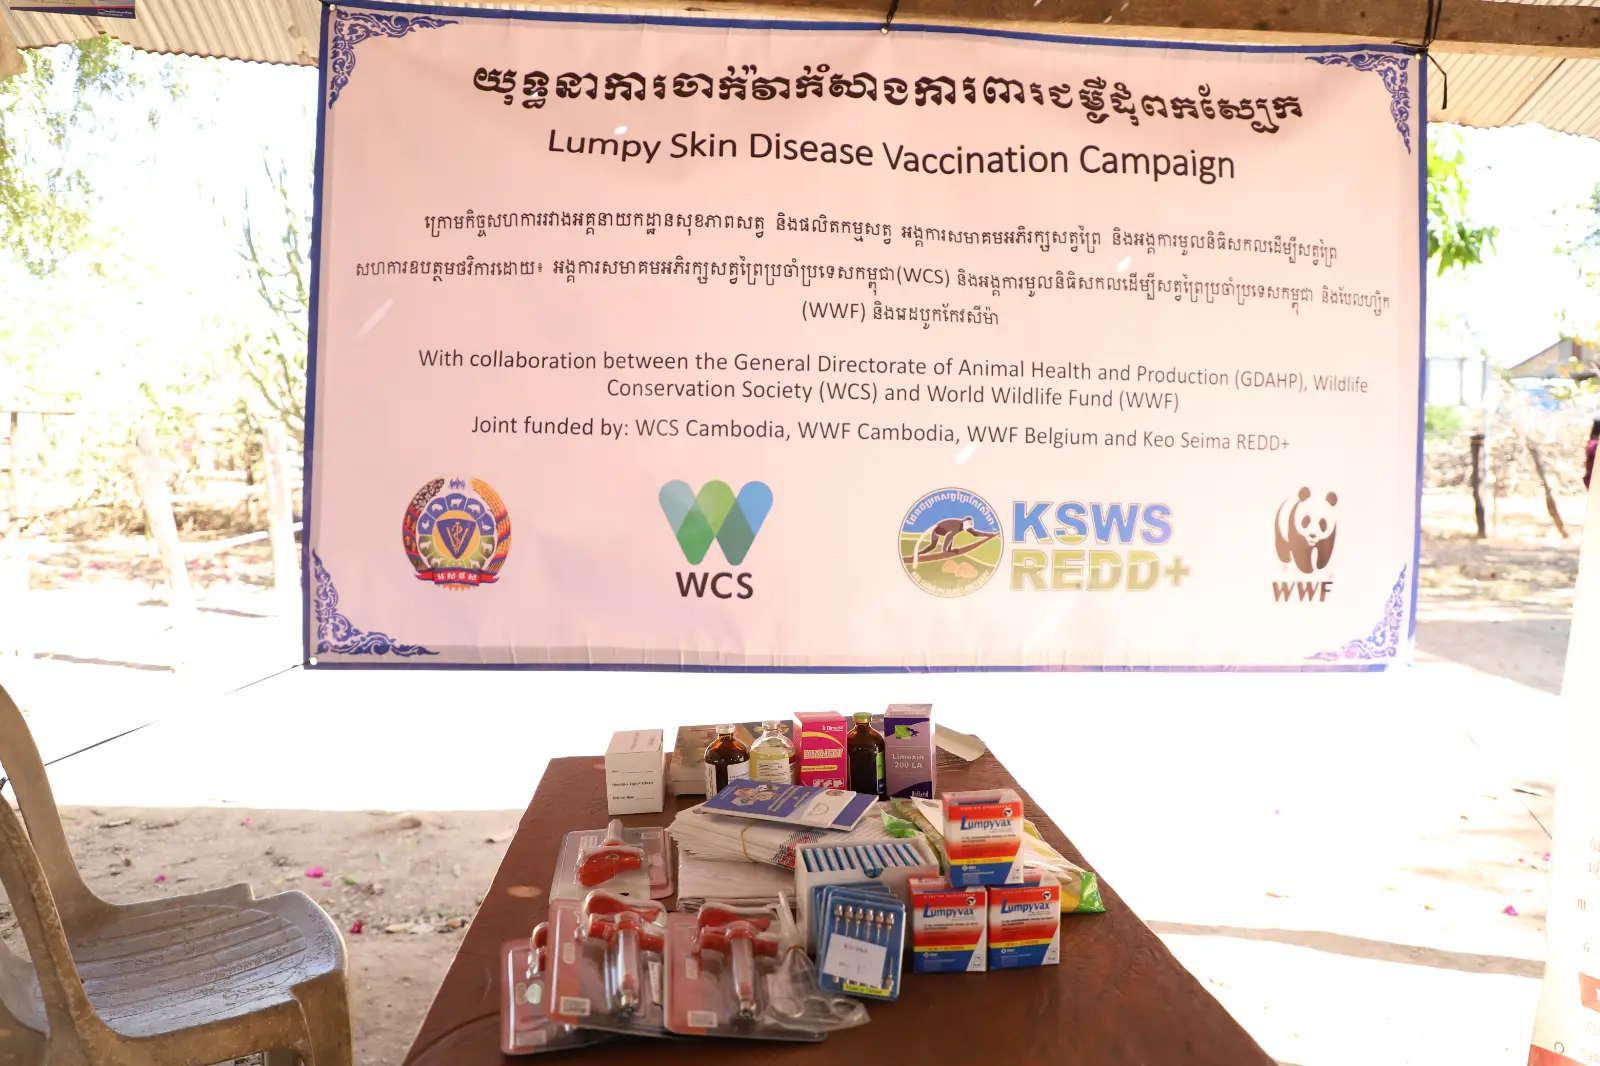 A vaccination campaign poster hanging above a table of medical supplies, bright sunshine behind